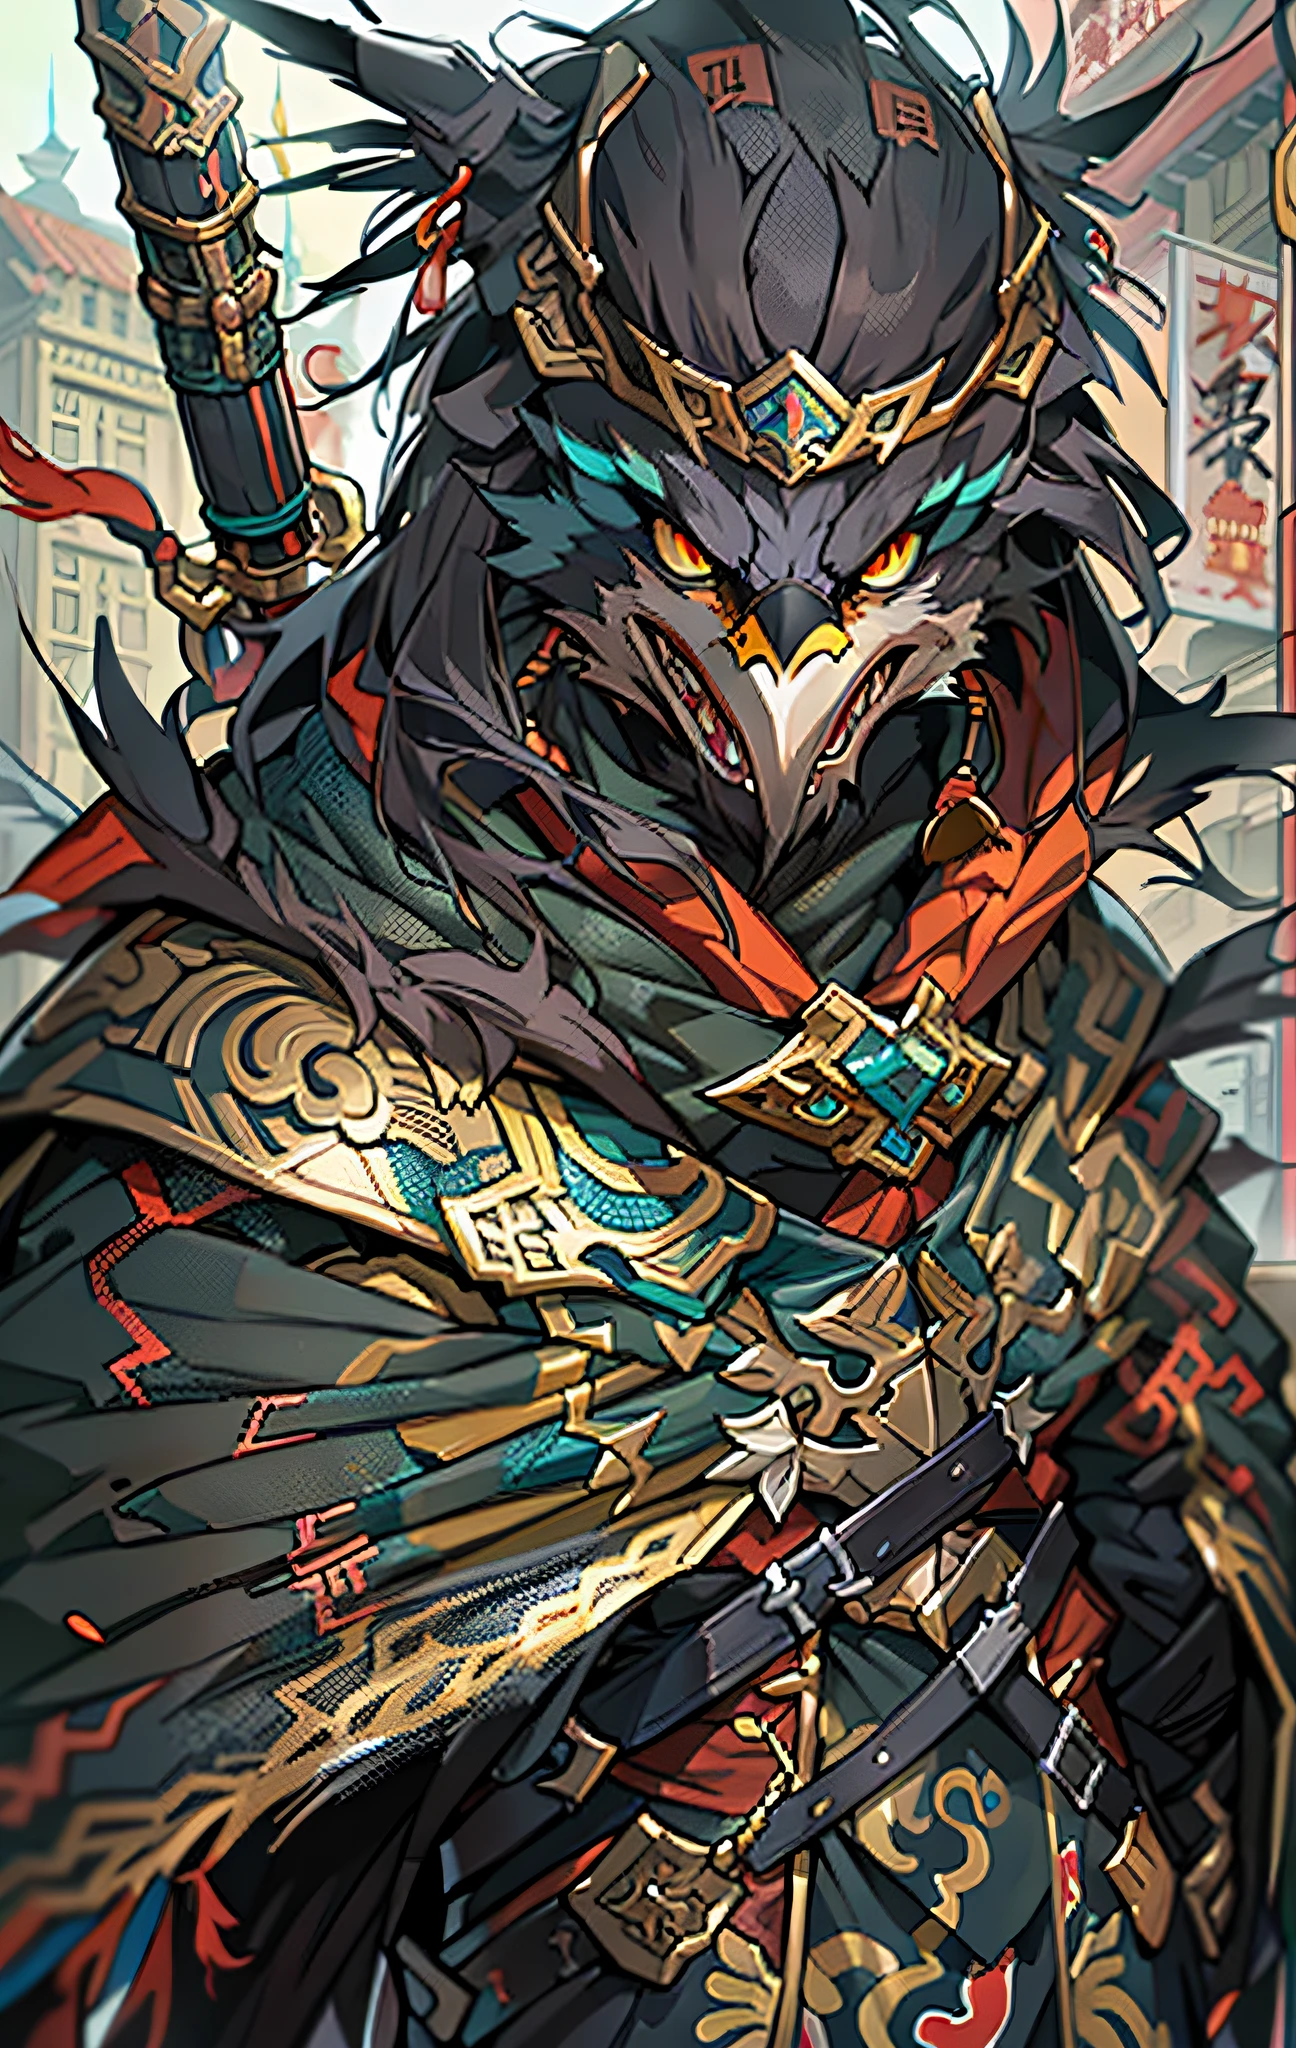 Eagle Assassins, Full body like，Close-up of Eagle Assassin in the city, Determined eyes，Fierce，Akira in Chinese mythology, an epic majestical degen trader, bian lian, by Yang J, Chinese Warrior, Anthropomorphic Assassin Eagle, Son Goku, cgsociety and fenghua zhong, inspired by Li Kan, Epic Assassin Warrior, Eagle Assassins, Black tattered cloak，Armour，Full body standing painting，Fantasy setting, character concept, character art, Character portrait, Cartoon, Best quality, Best resolution, 4K, Vivid colors, Vivid, High detail, best detail, confident pose, extrovert, look from down,